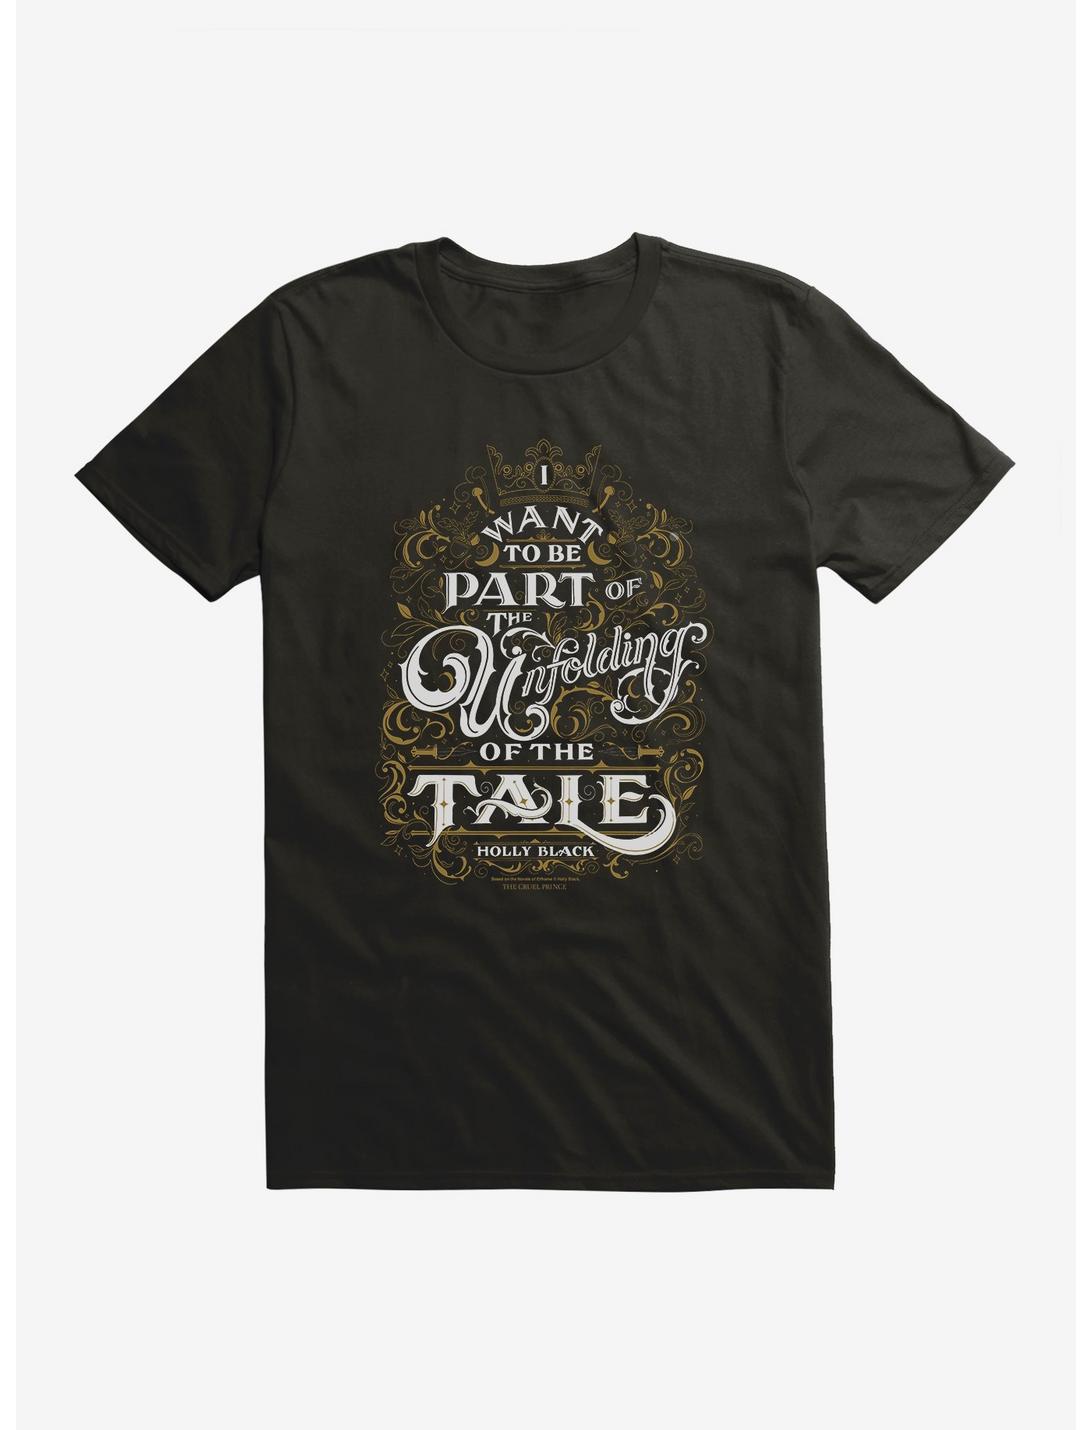 The Cruel Prince Sinister Enchantment Collection: Unfolding Of The Tale T-Shirt , BLACK, hi-res